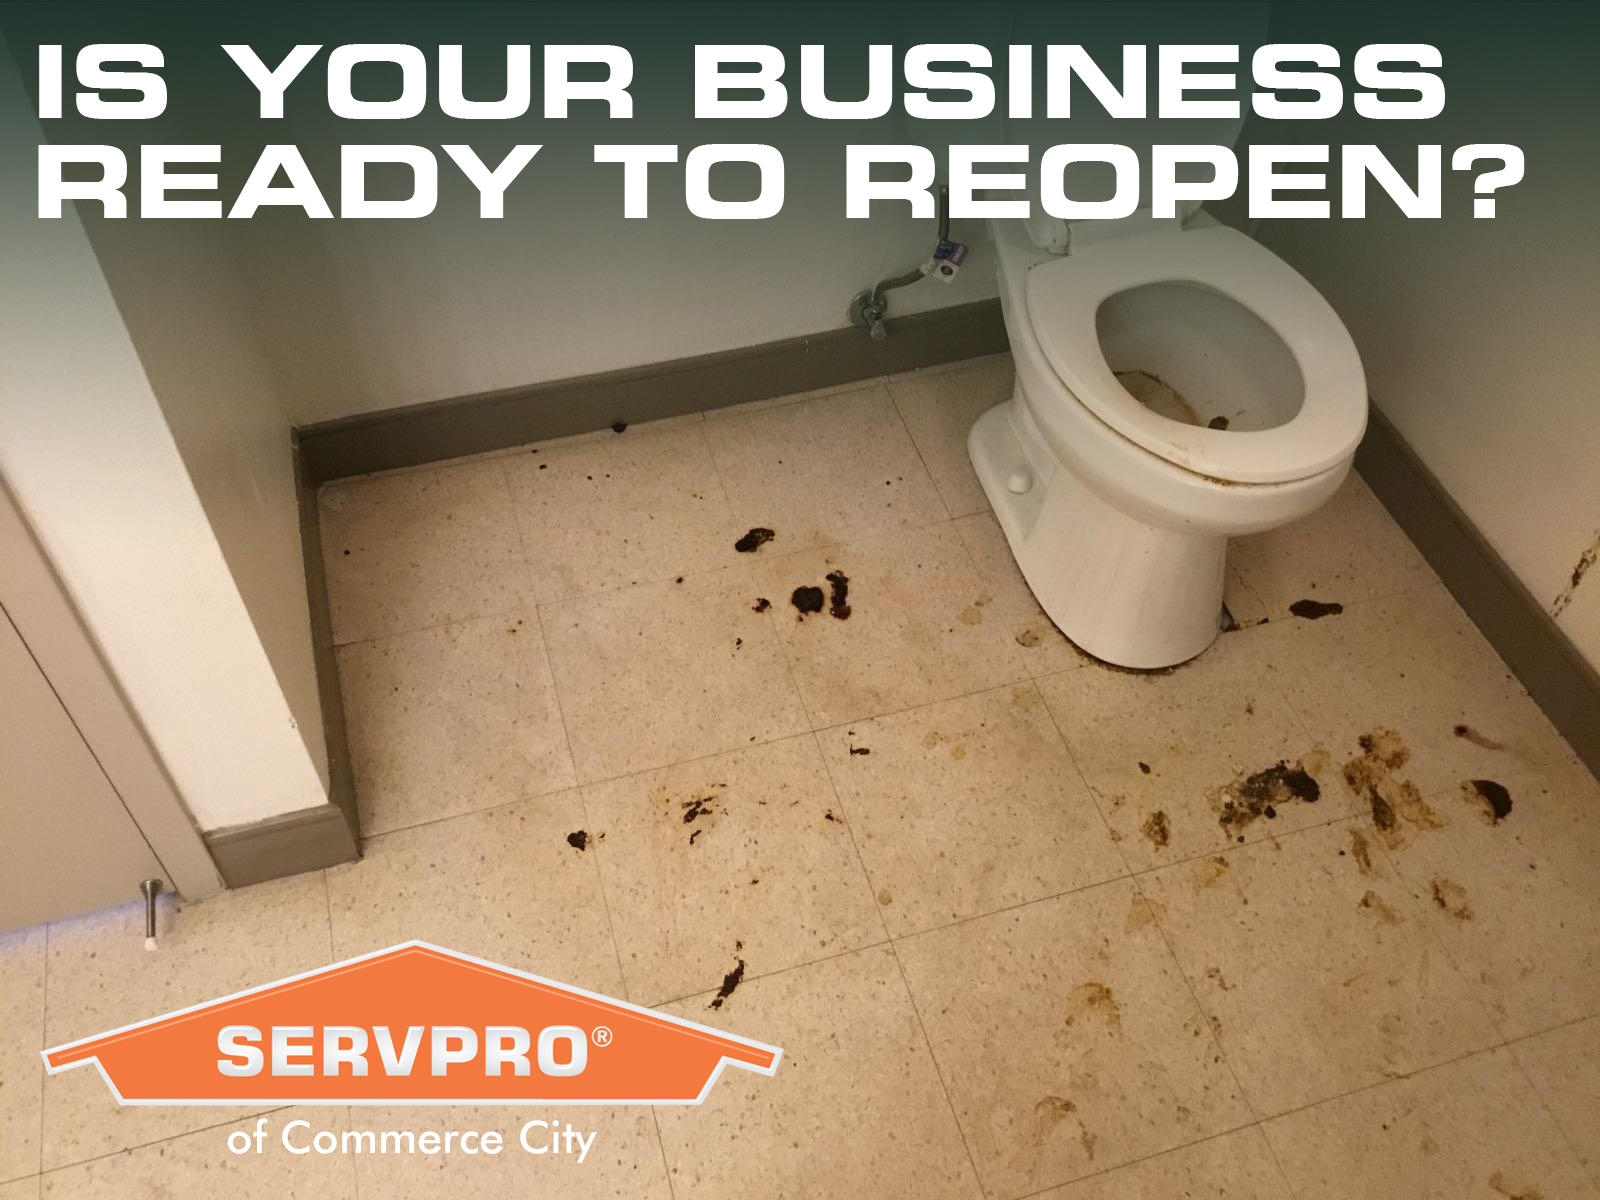 We offer cleaning services ranging from cleaning restaurant hoods to removing biohazard contaminants.